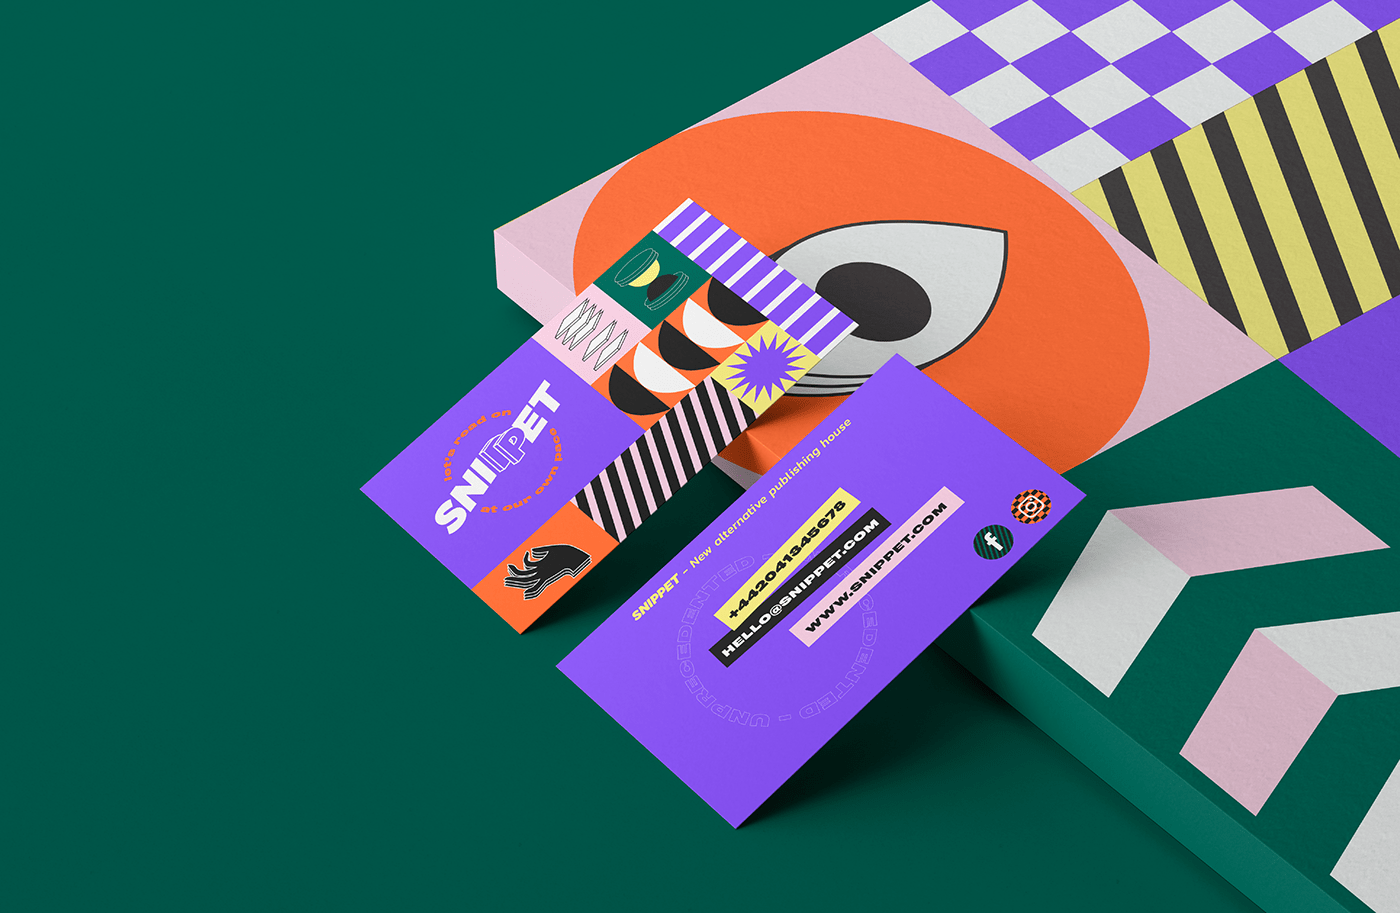 graphic design  ILLUSTRATION  branding  Packaging visual identity app book colorful literature publishing house